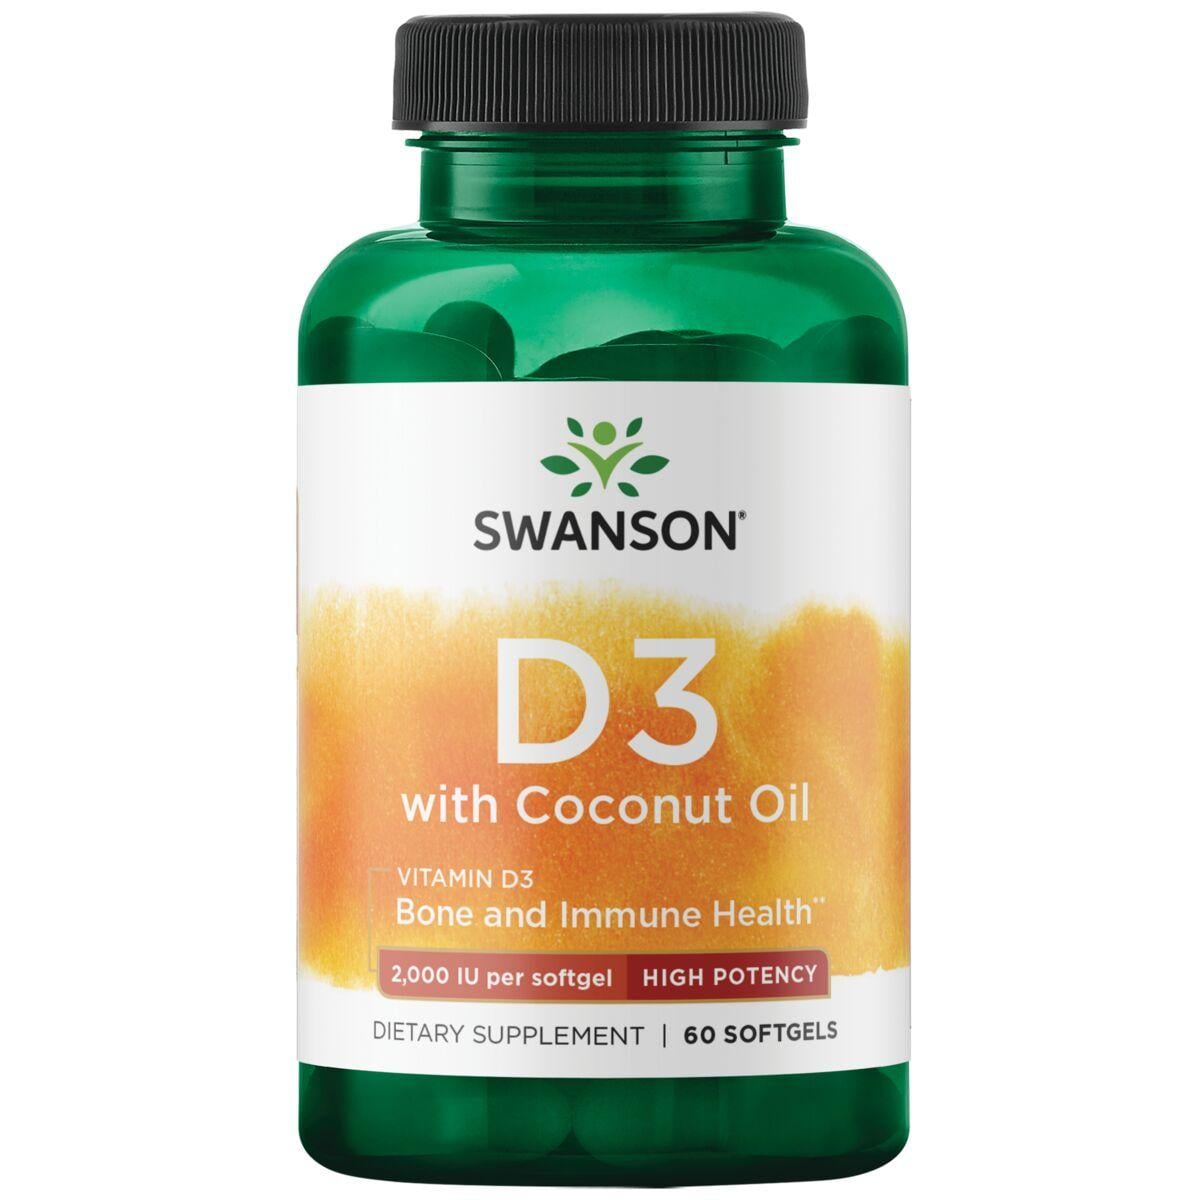 Swanson Ultra Vitamin D3 with Coconut Oil - High Potency | 2000 Iu | 60 Soft Gels